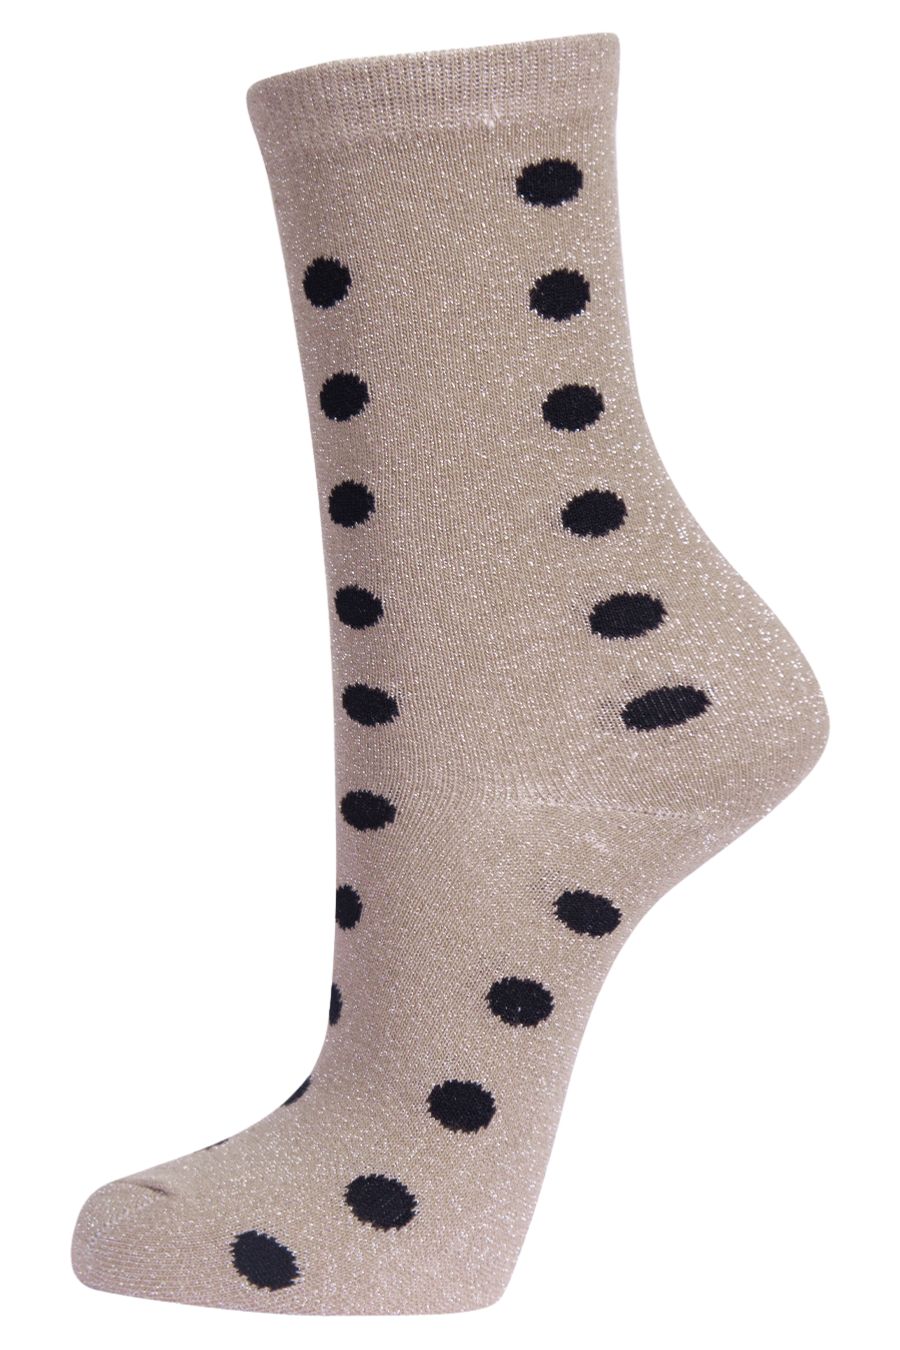 beige ankle socks with black polka dots and an all over silver glitter sparkle